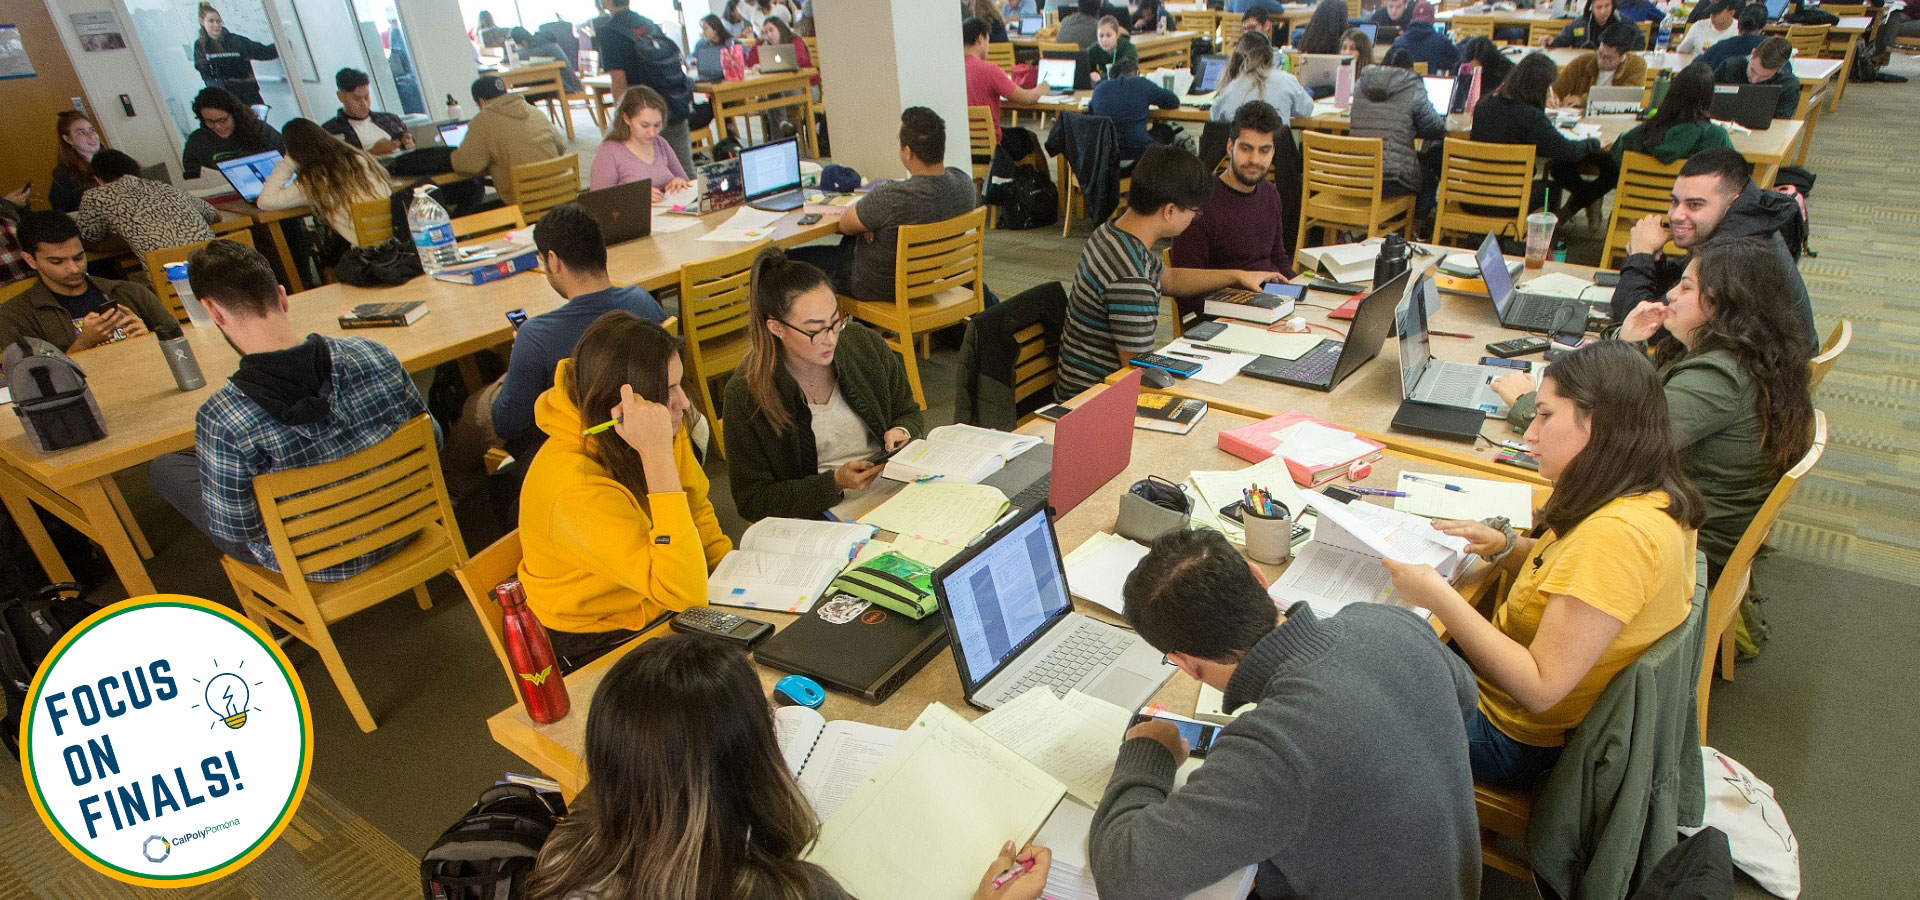 Students studying in the university library